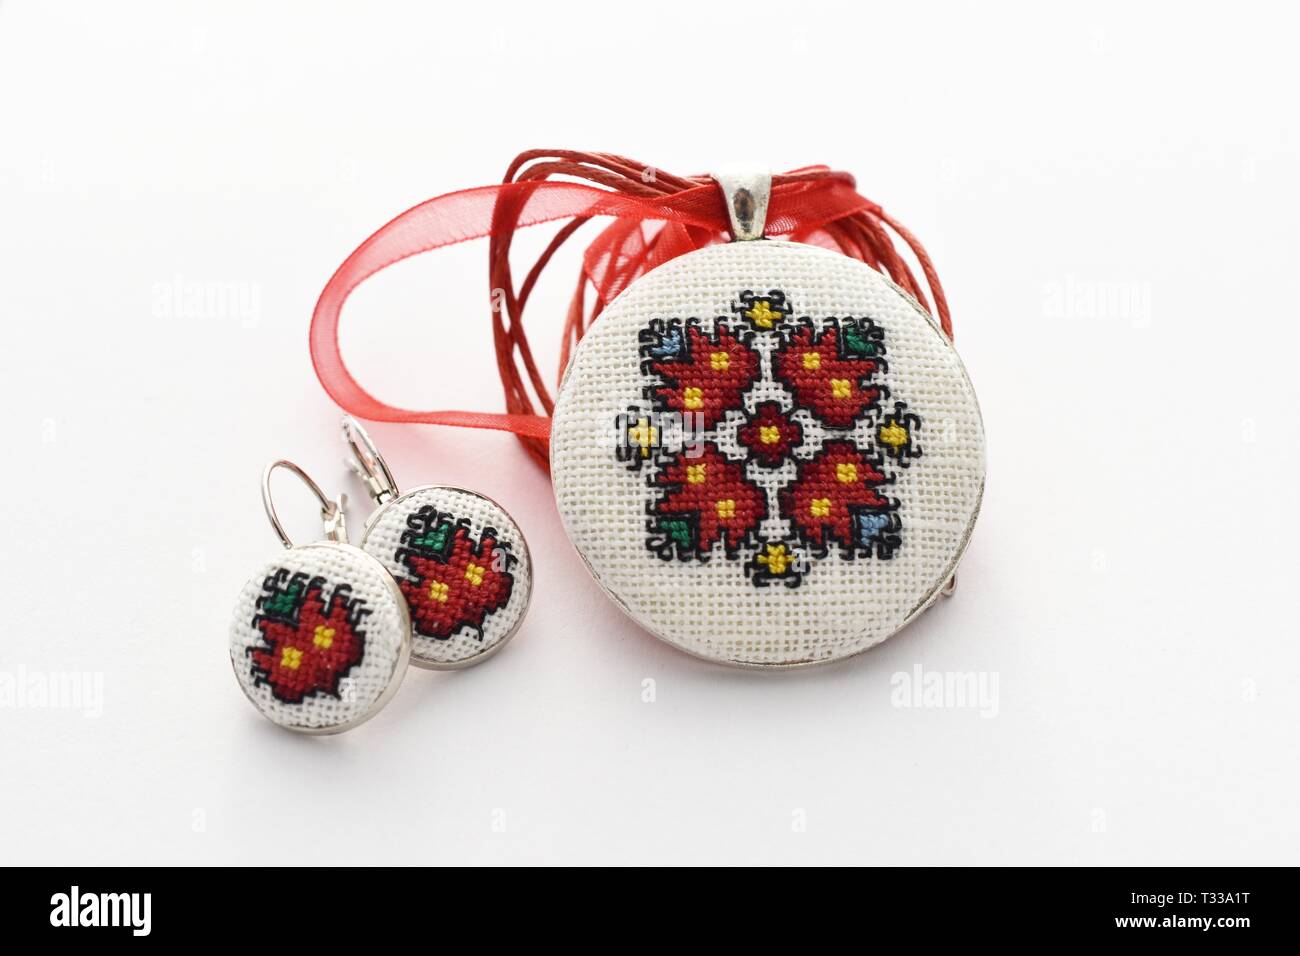 Handmade Cross stitch Earrings Red Earrings embroidered on white plastic  canvas Stock Photo - Alamy